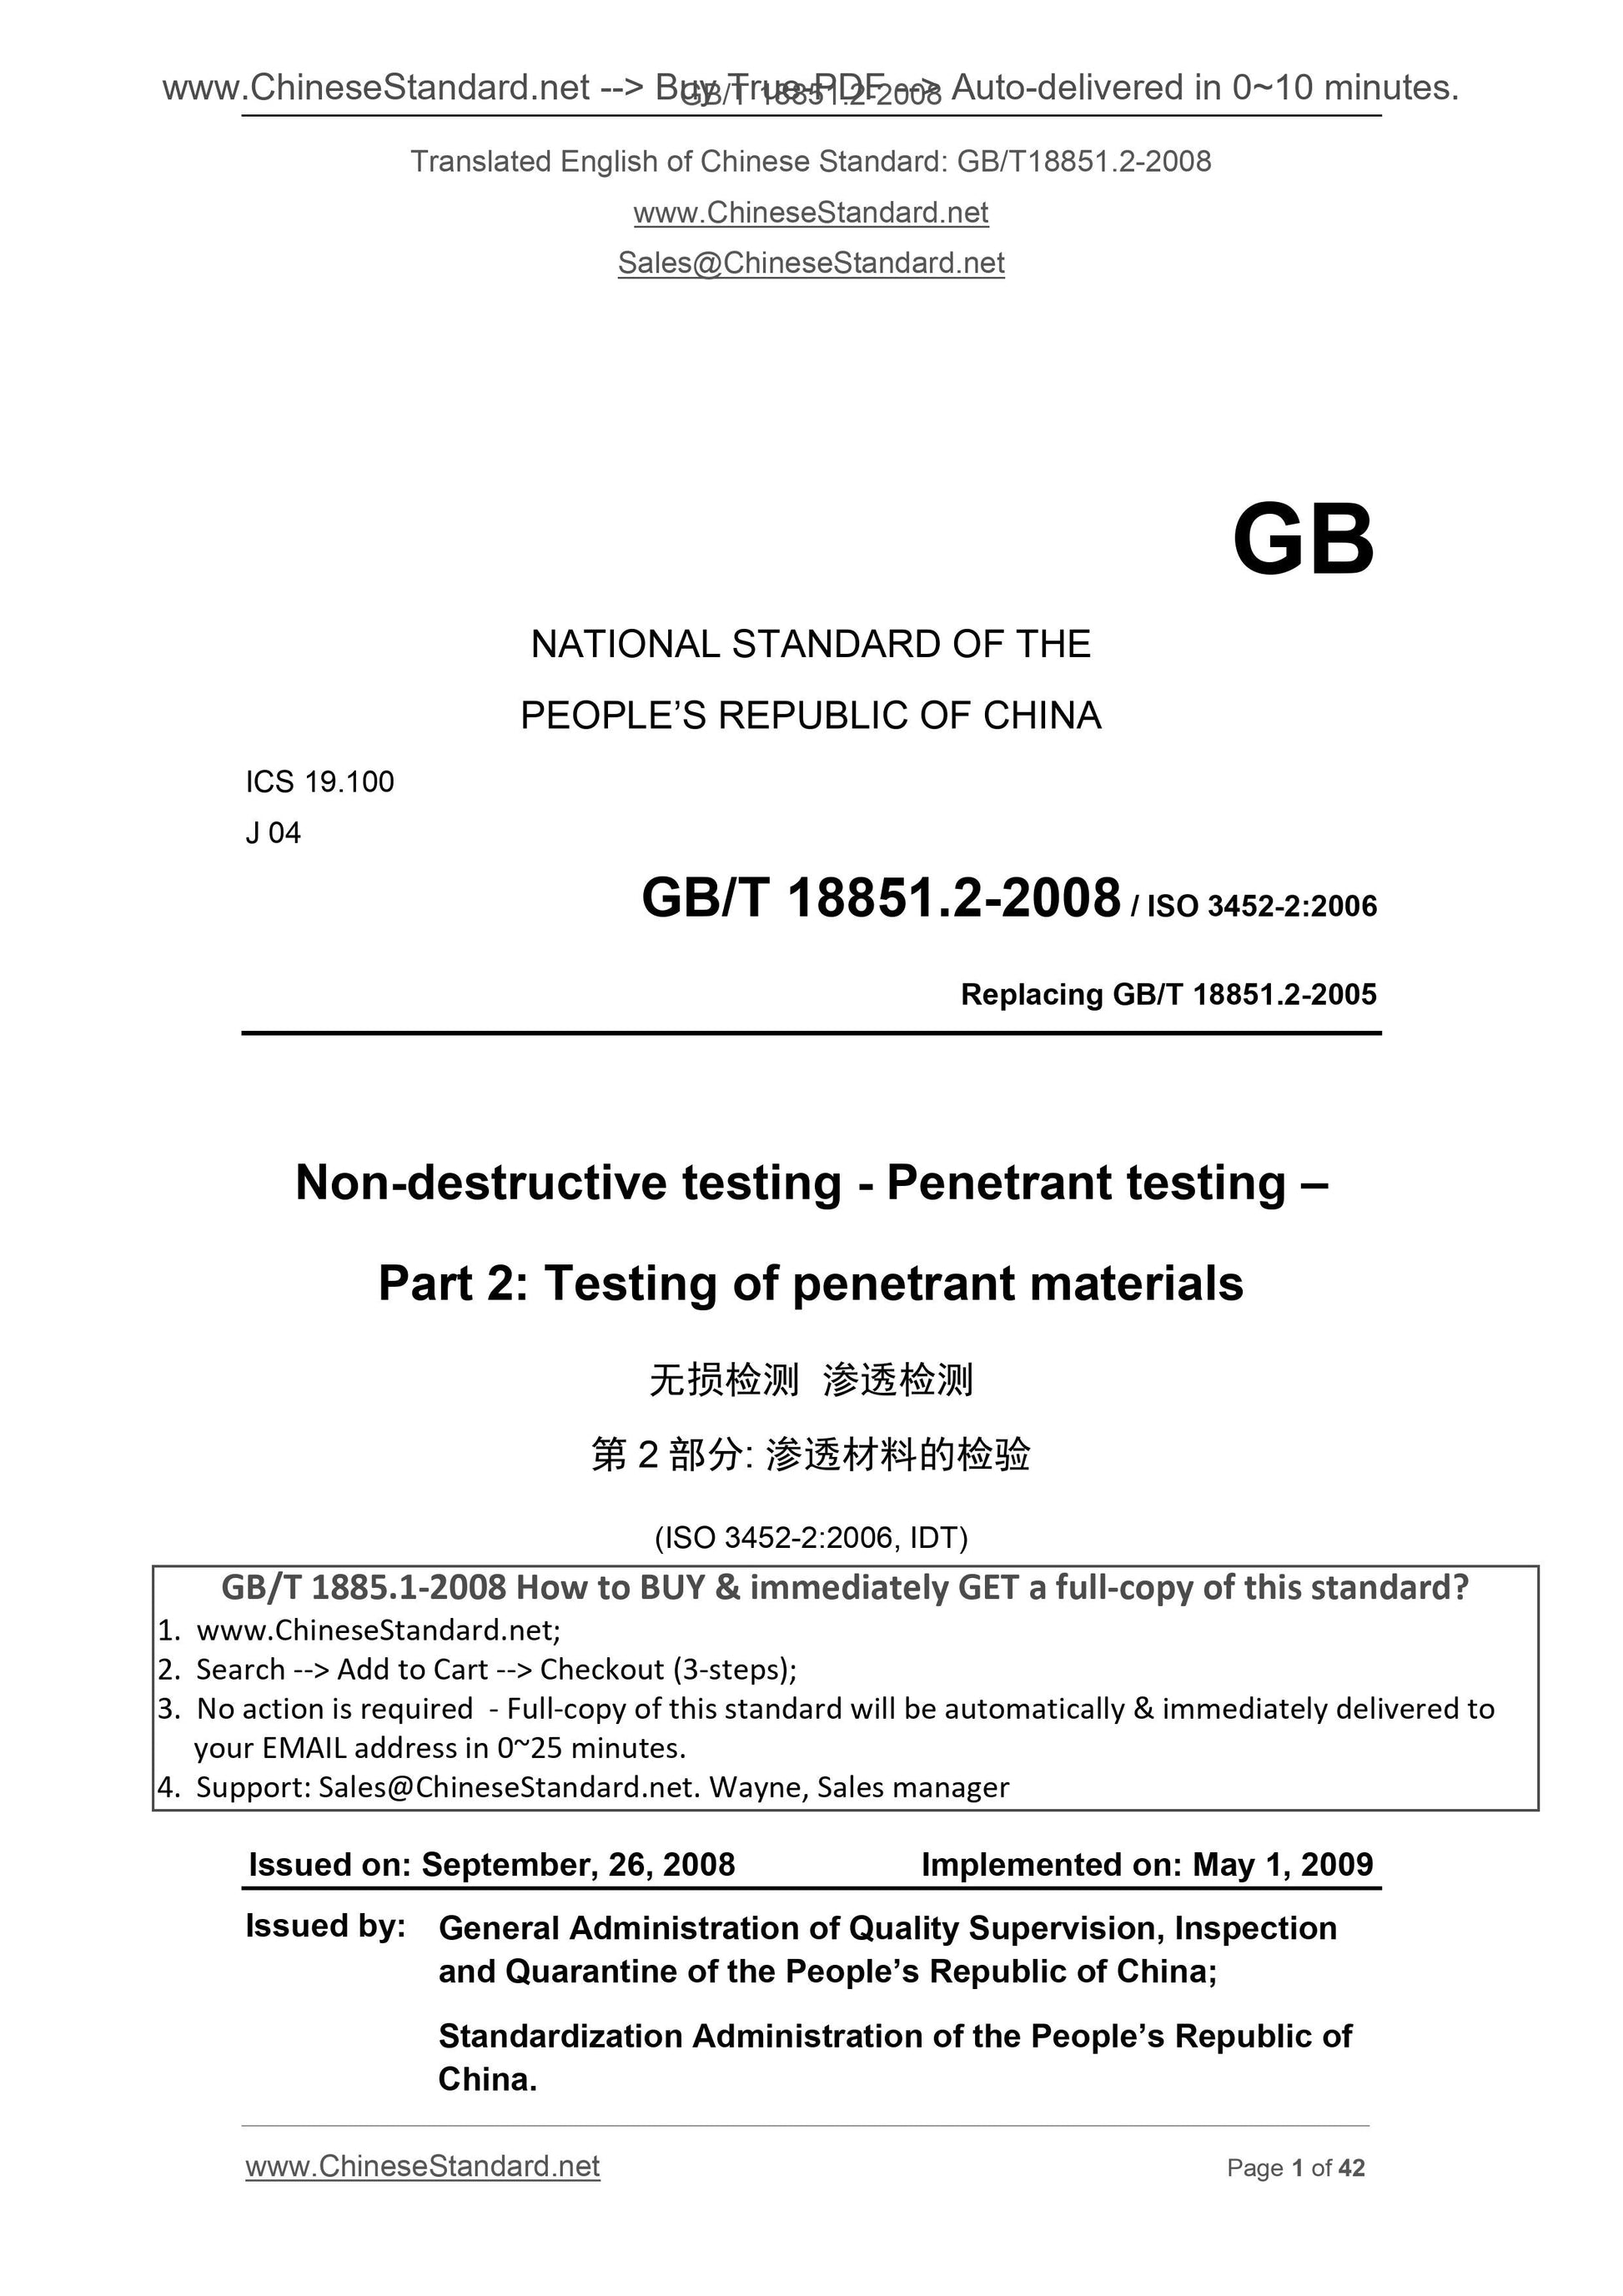 GB/T 18851.2-2008 Page 1